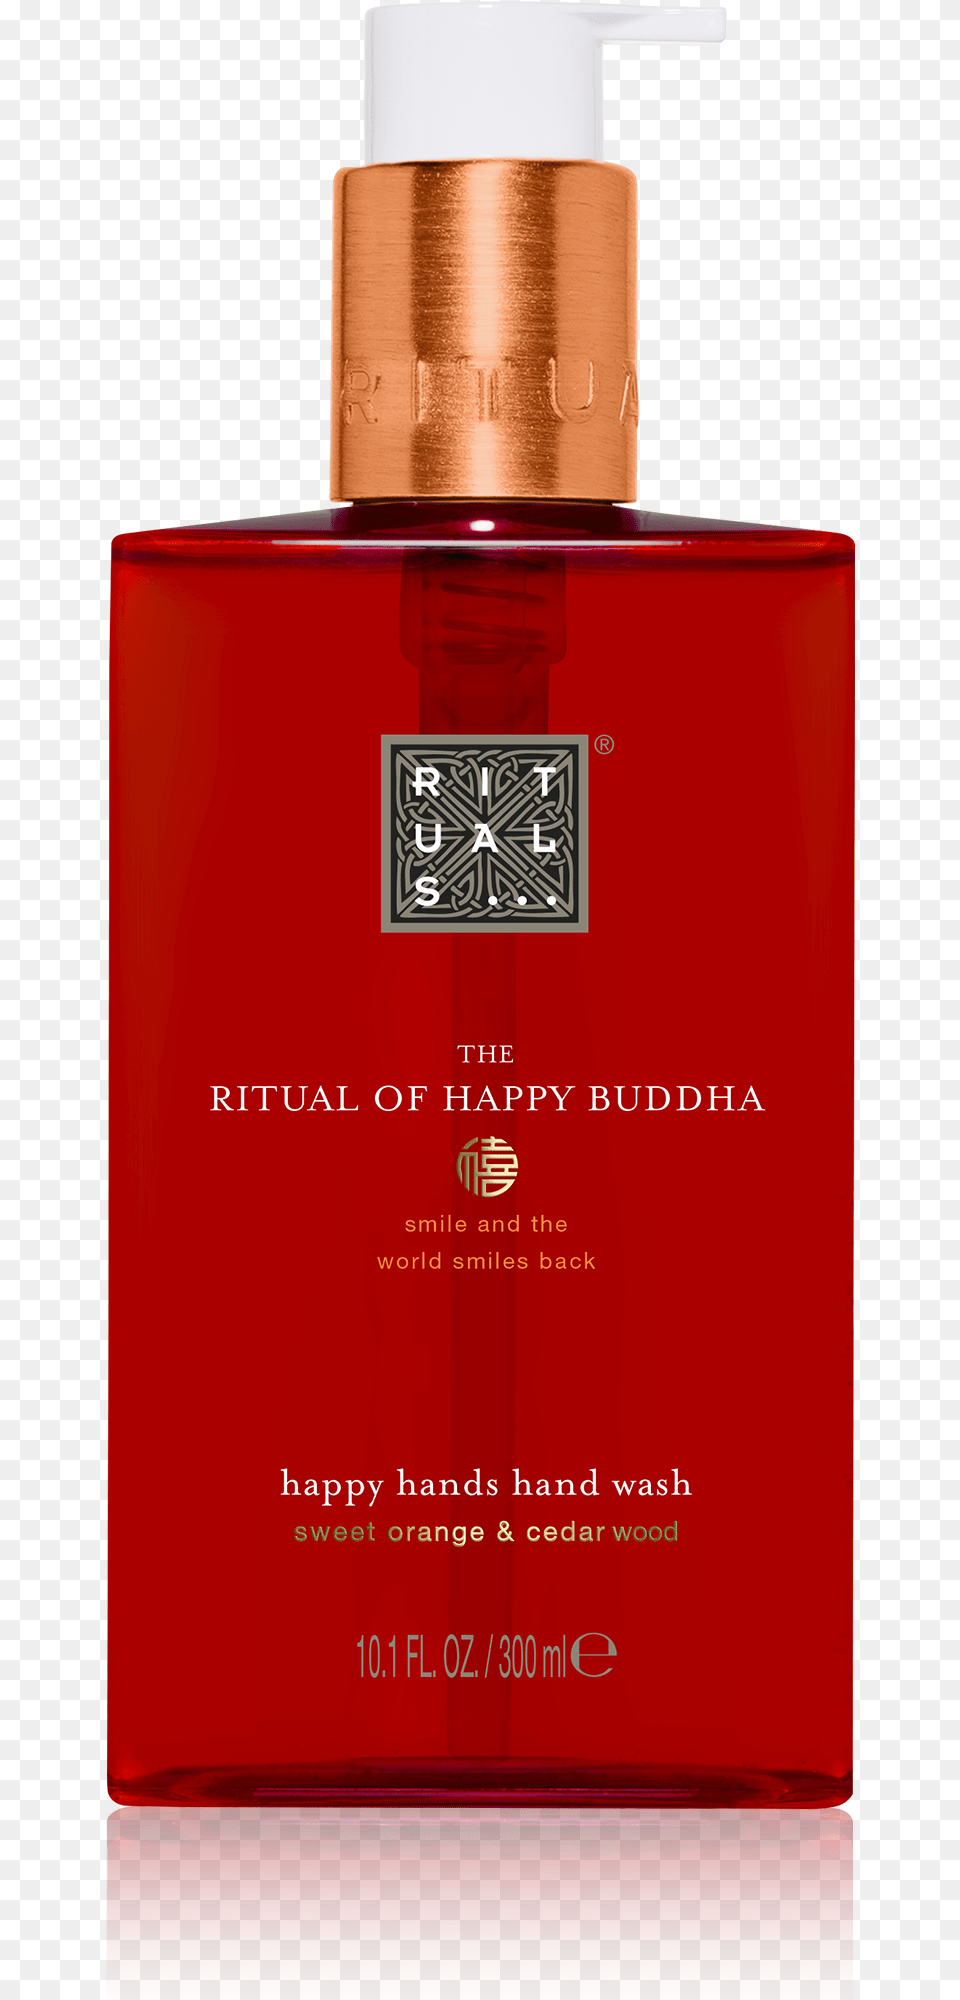 The Ritual Of Happy Buddha Hand Washtitle The Ritual, Bottle, Cosmetics, Perfume, Aftershave Png Image